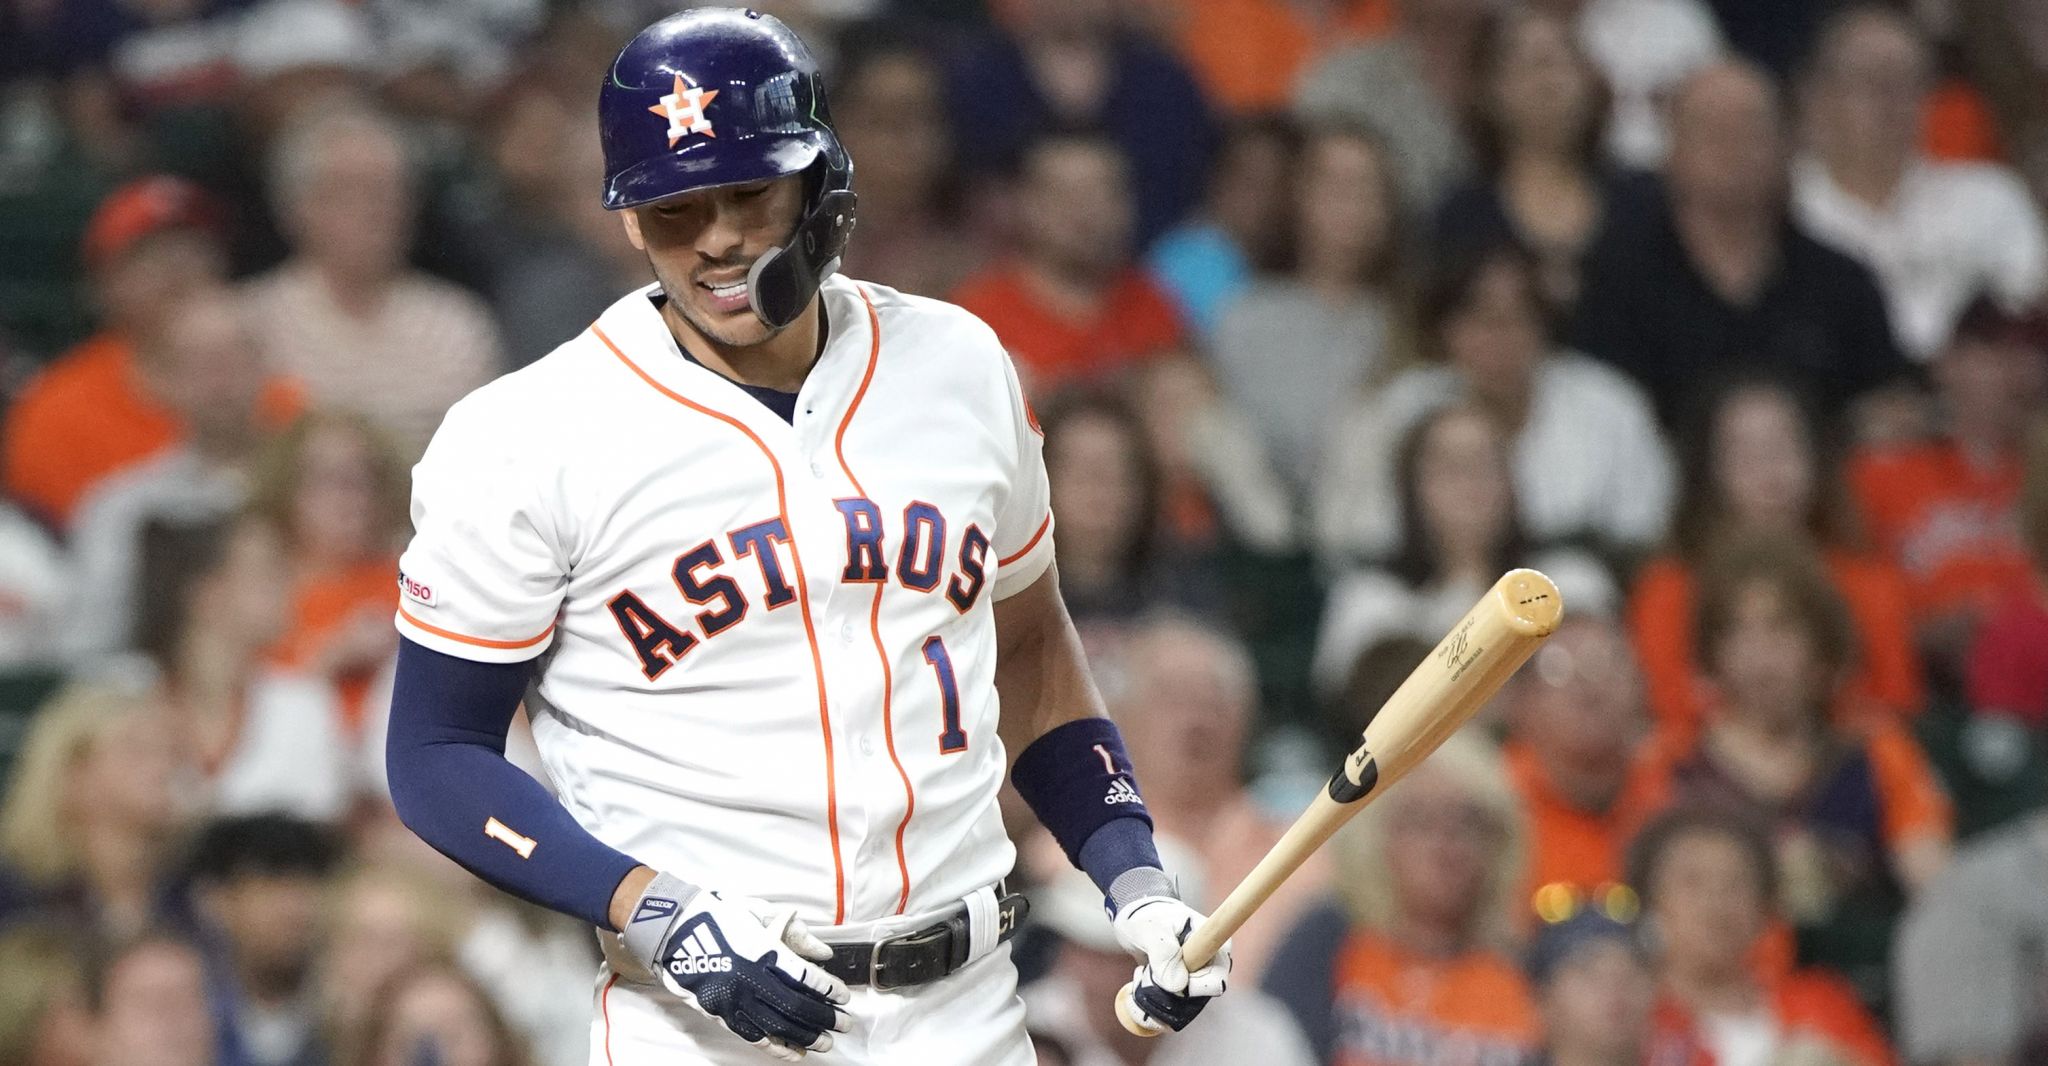 Astros insider: For Carlos Correa, it's about discipline and